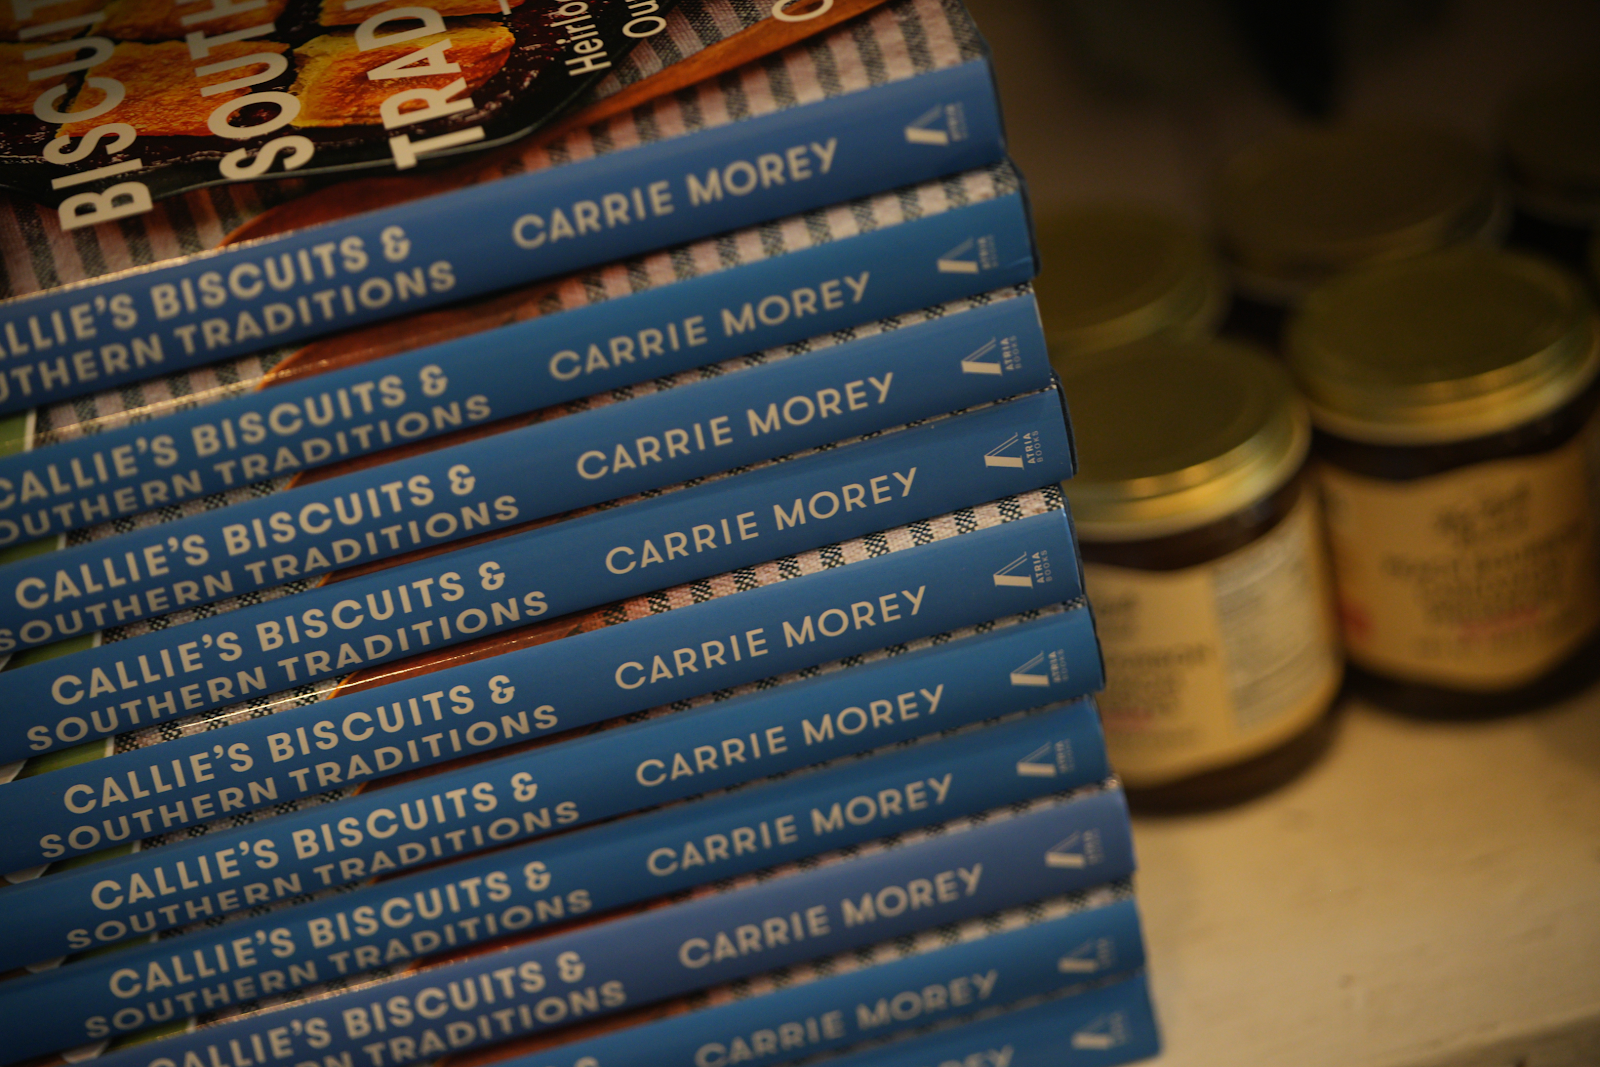 A stack of cook books from Carrie Morey, owner of Callie's Hot Little Biscuits